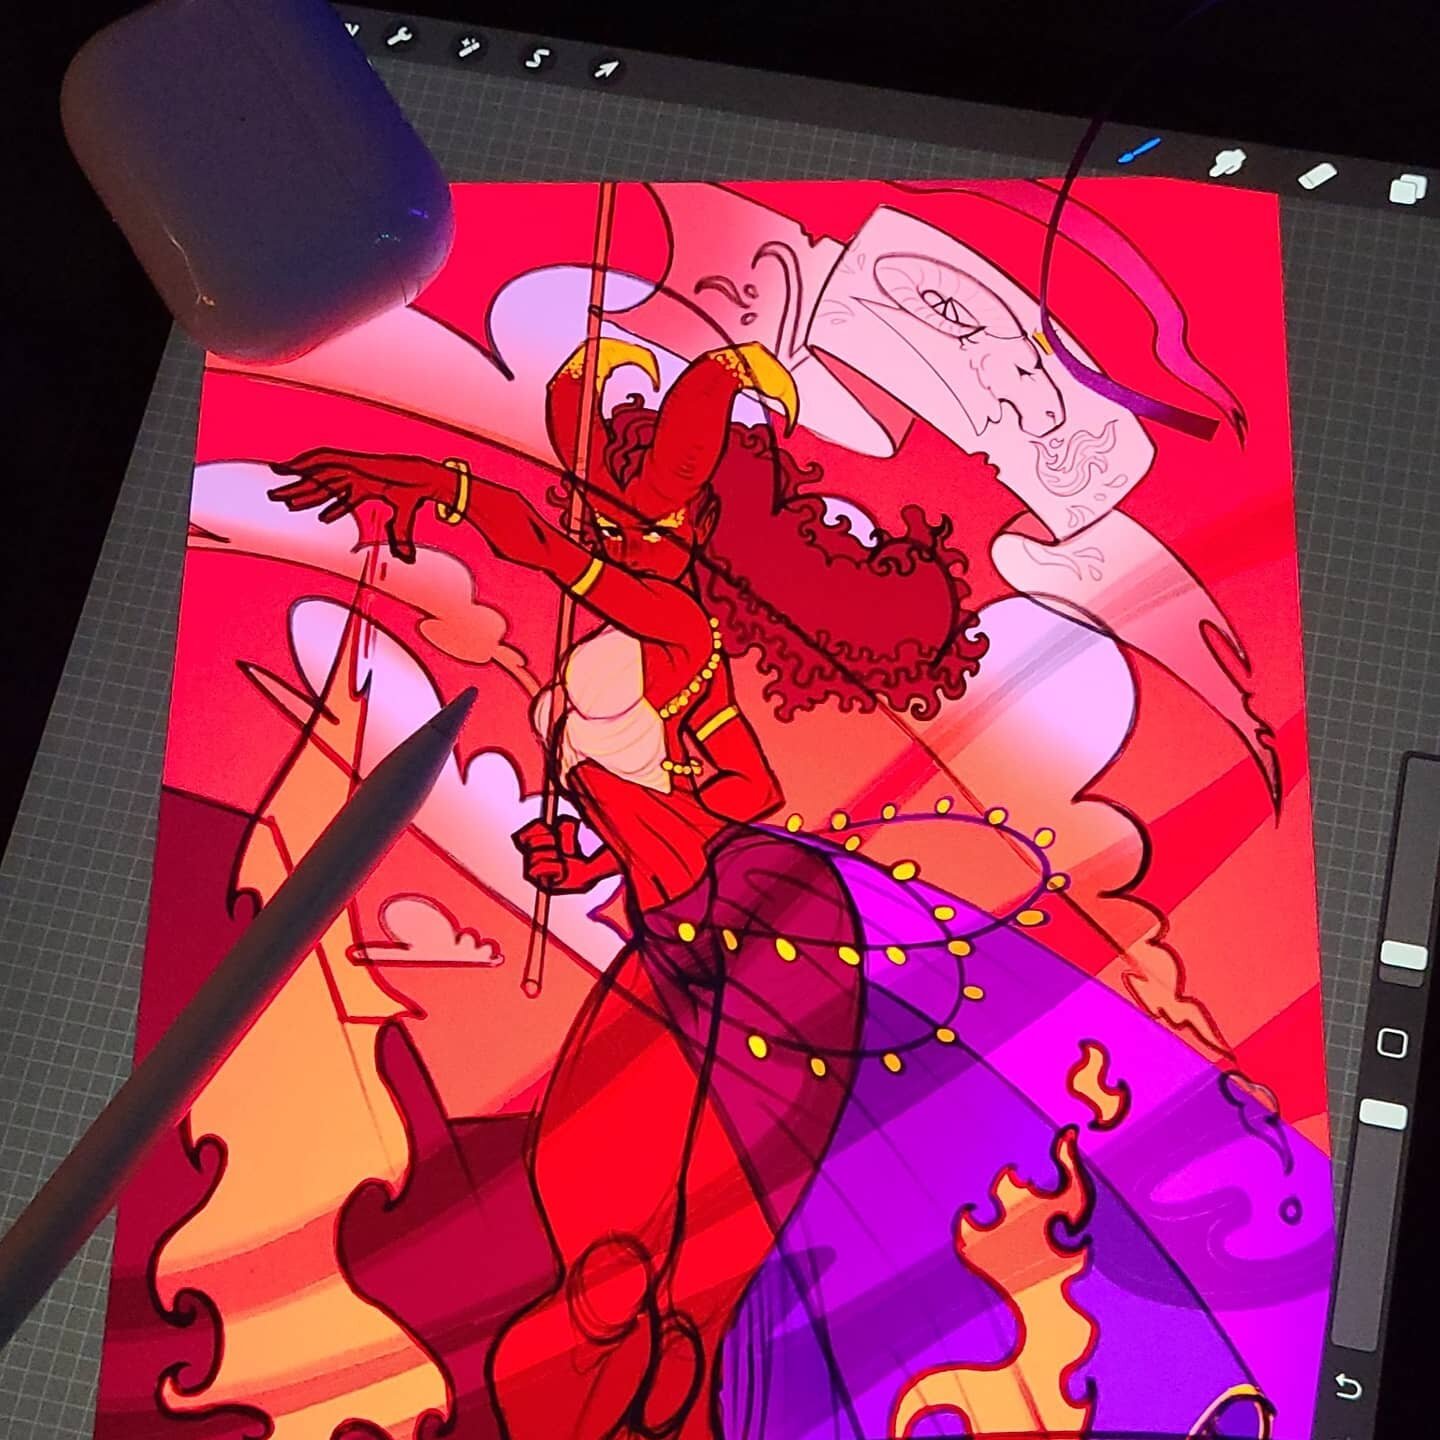 Listening to Billie Eilish to get me into the mood for this piece 🔥 wip on procreate
.
.
.
#aries #zodiac #astrology #fire #characterdesign #tiefling #fantasy #art #artist #illustration #artwip #sketch #procreate #design #comicart #illust